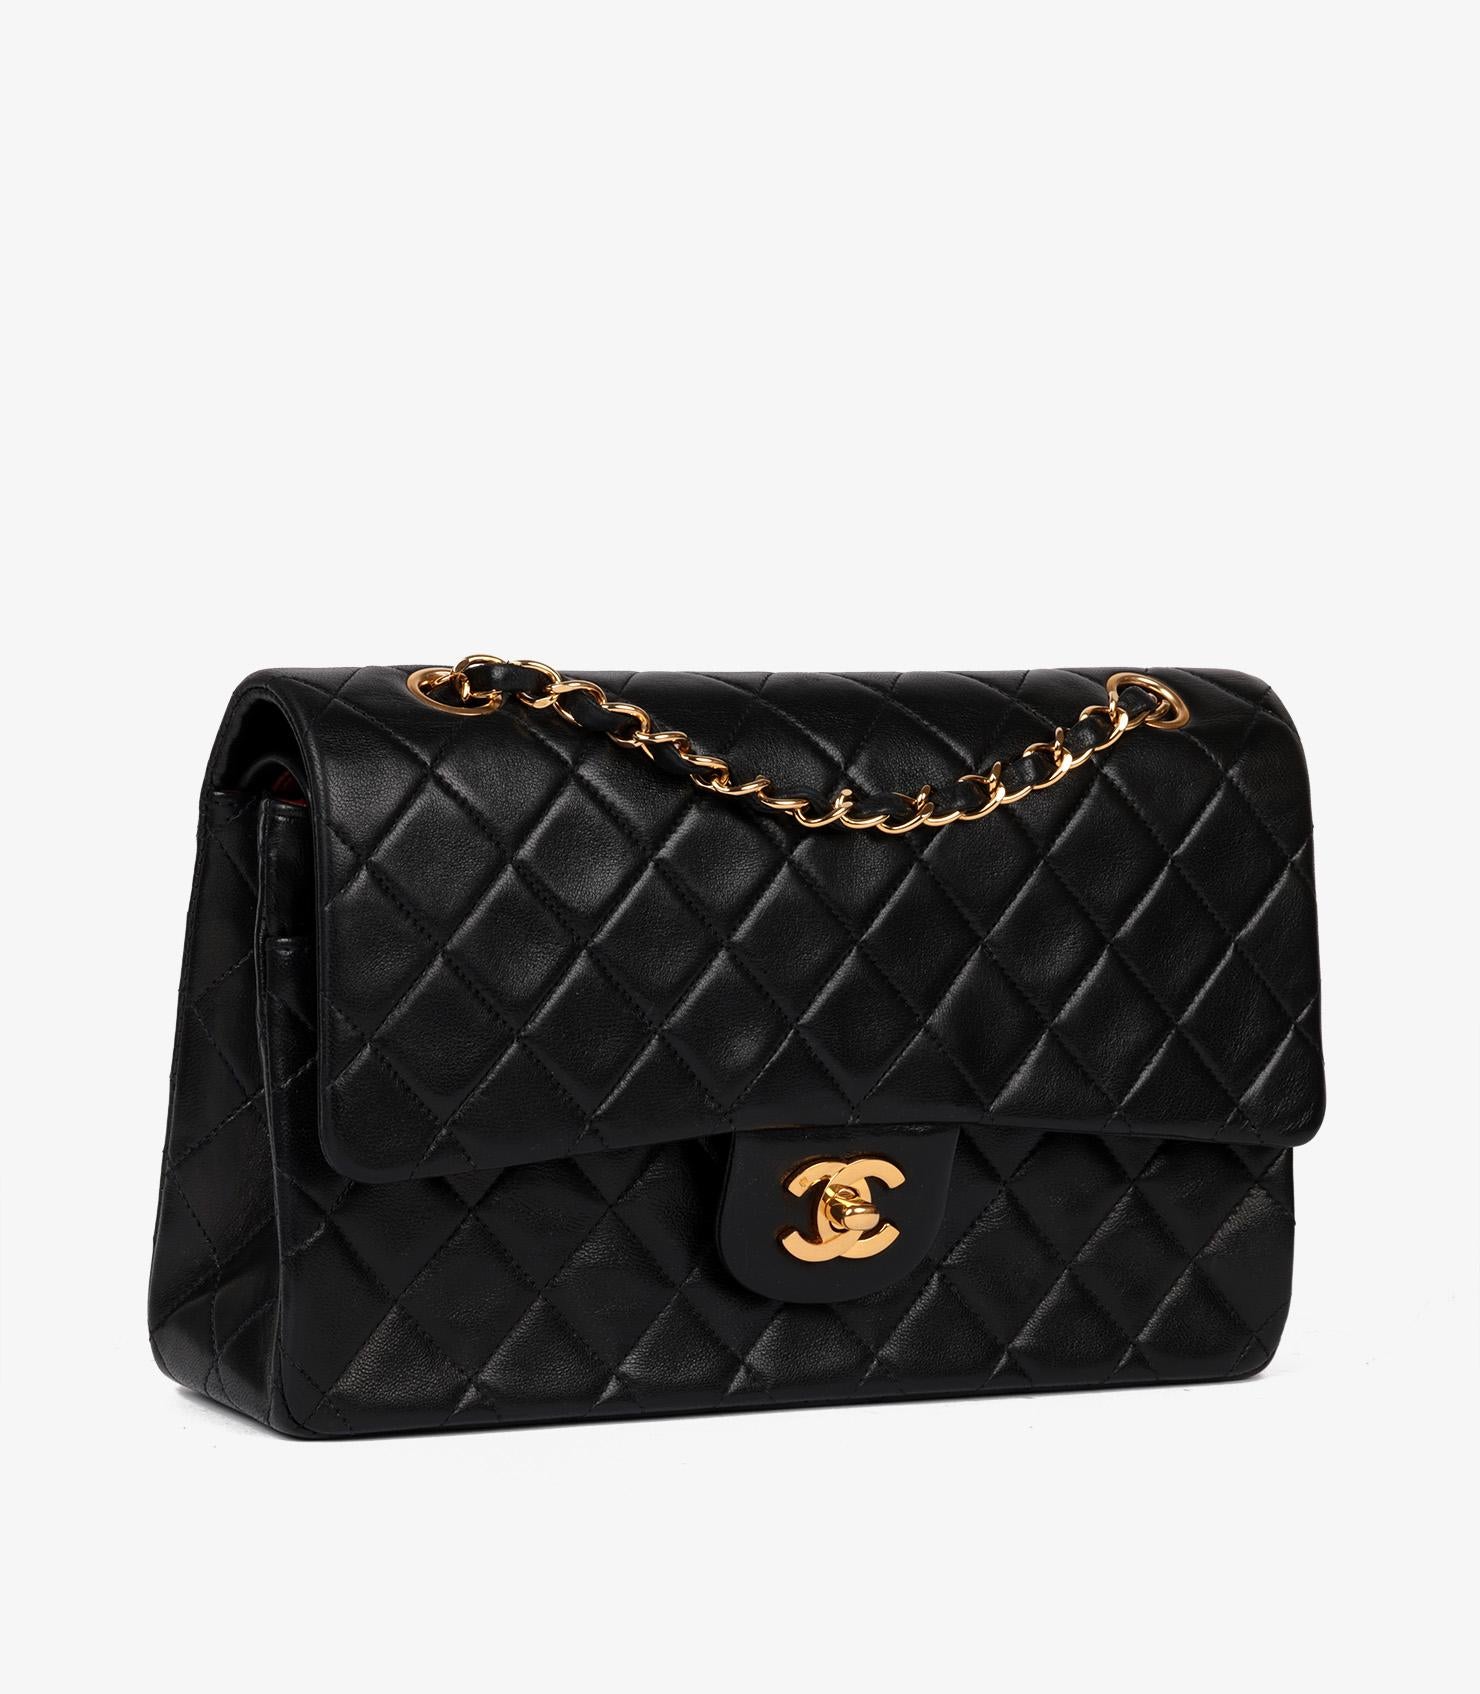 Chanel Black Quilted Lambskin Vintage Medium Classic Double Flap Bag

Brand- Chanel
Model- Medium Classic Double Flap Bag
Product Type- Shoulder
Serial Number- 22*****
Age- Circa 1991
Accompanied By- Chanel Dust Bag, Authenticity Card
Colour-